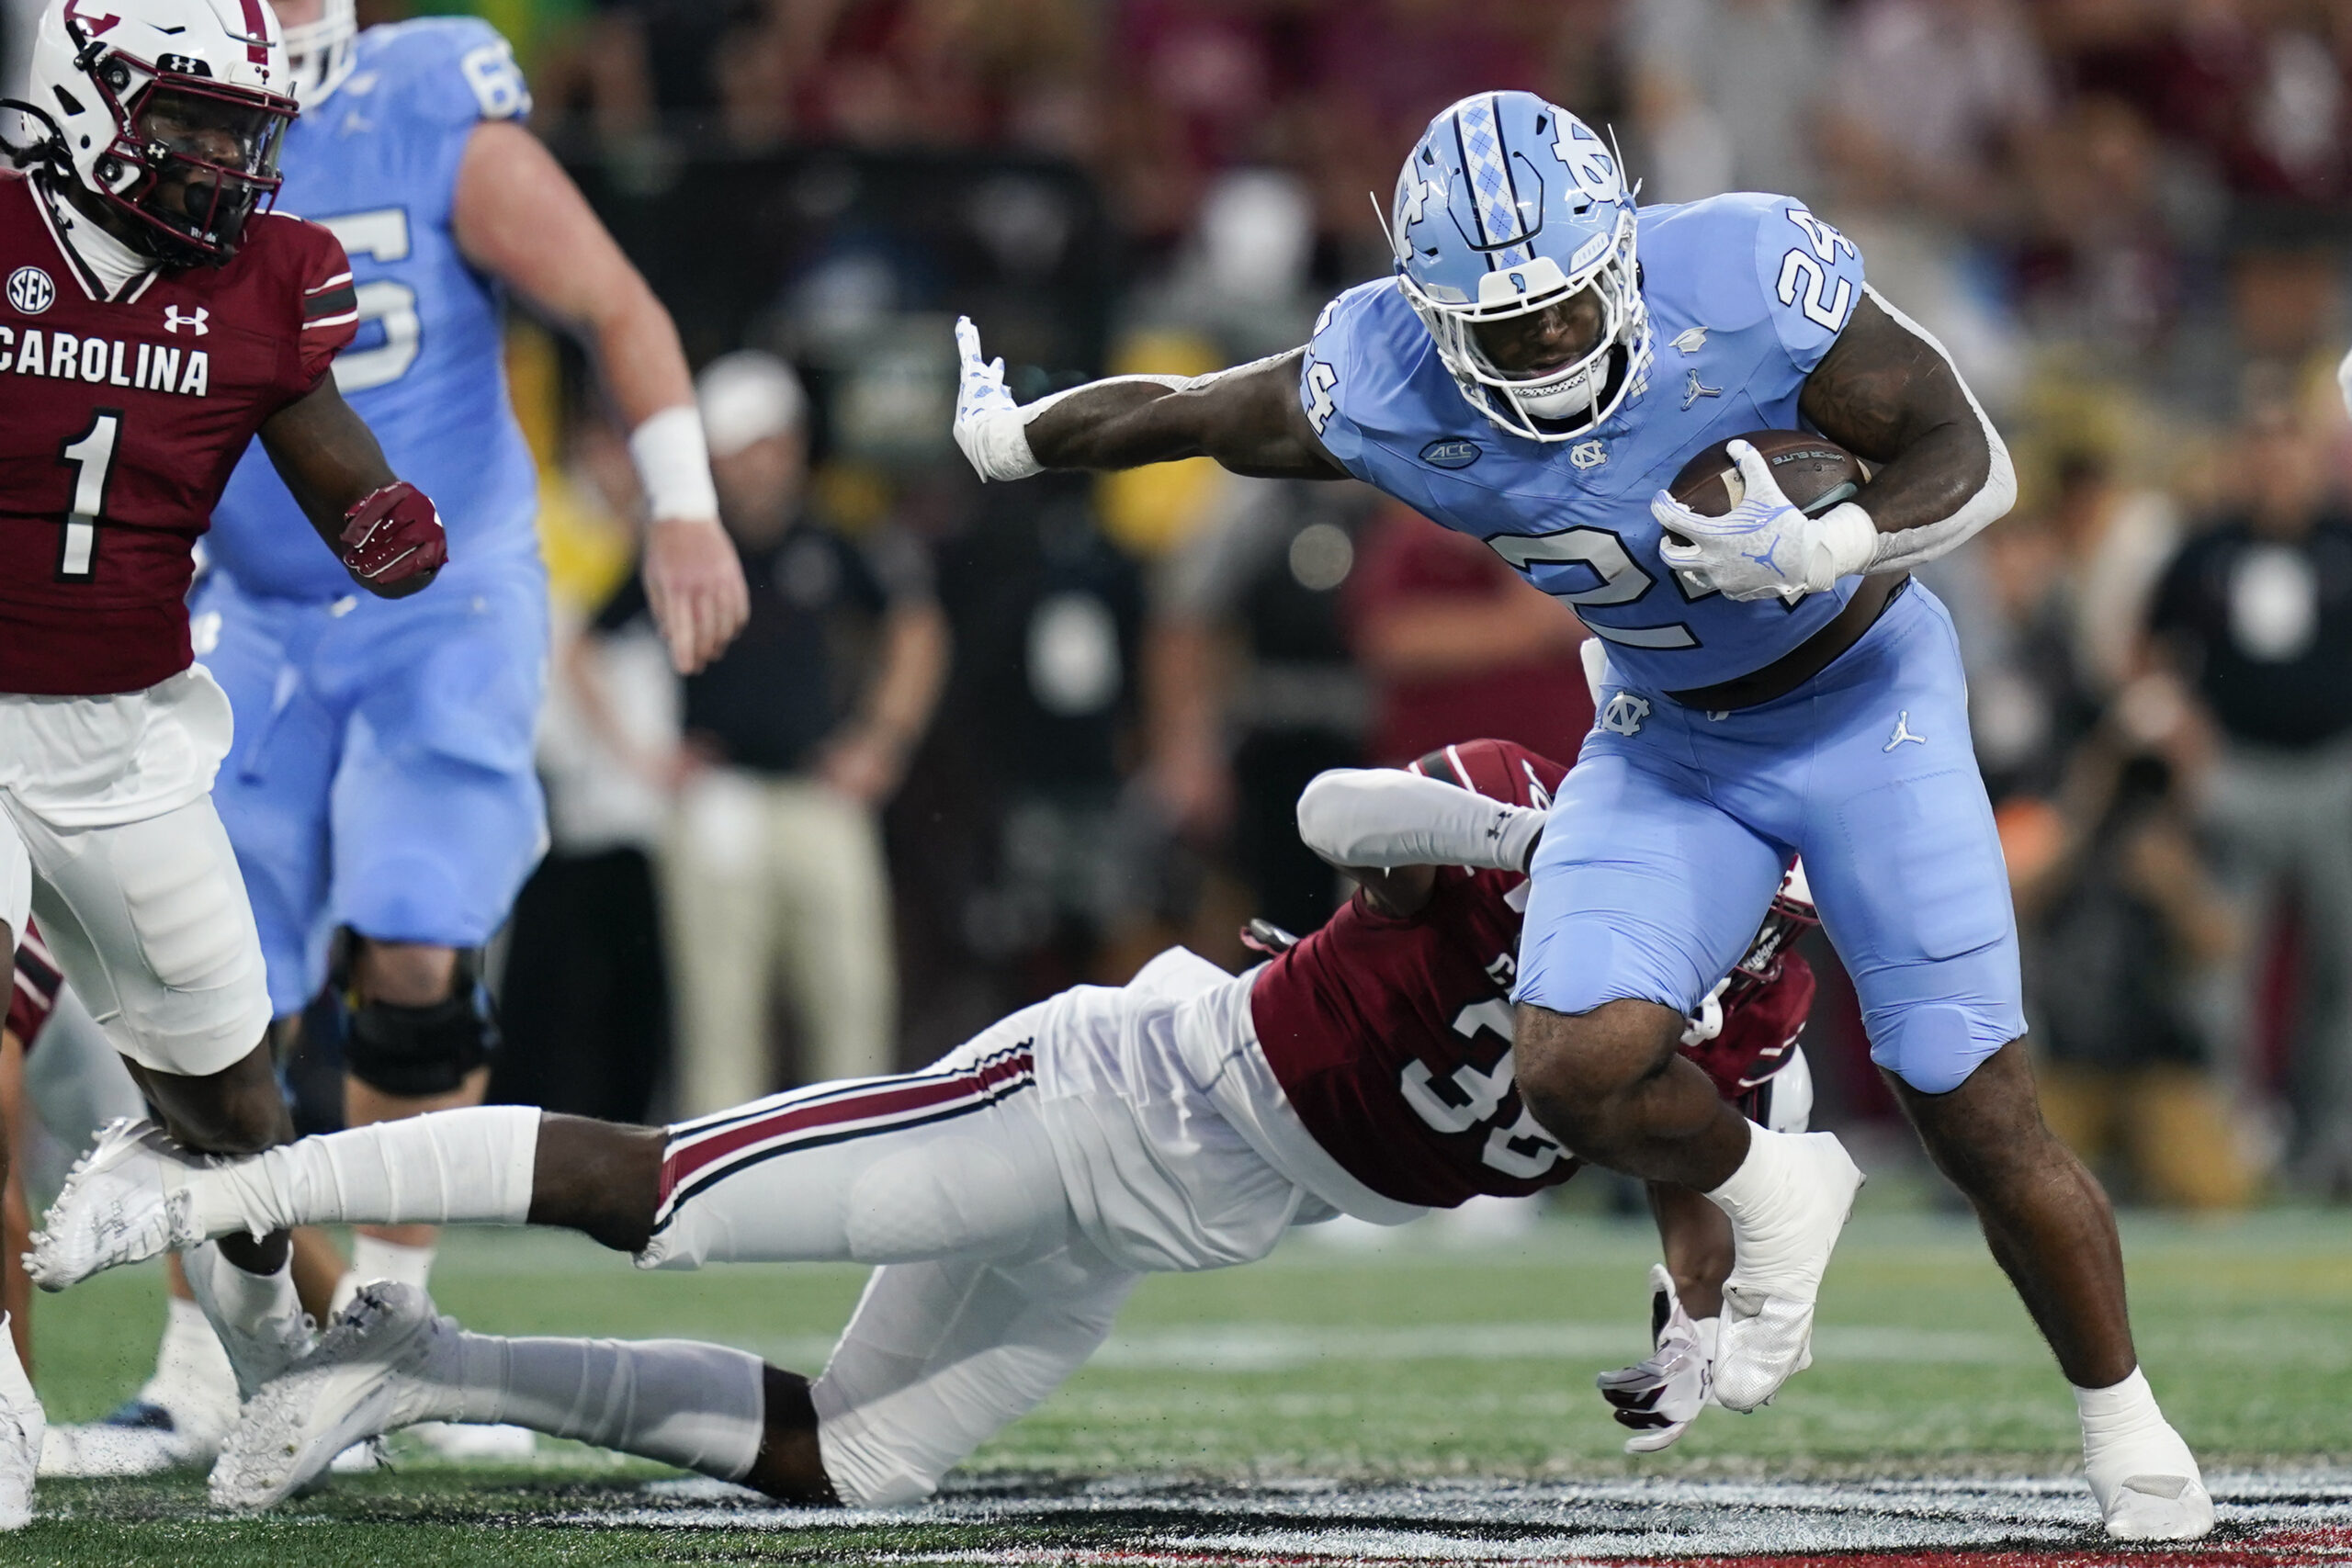 UNC's Win Over South Carolina Even More Satisfying for Tar Heels After Emotional Buildup